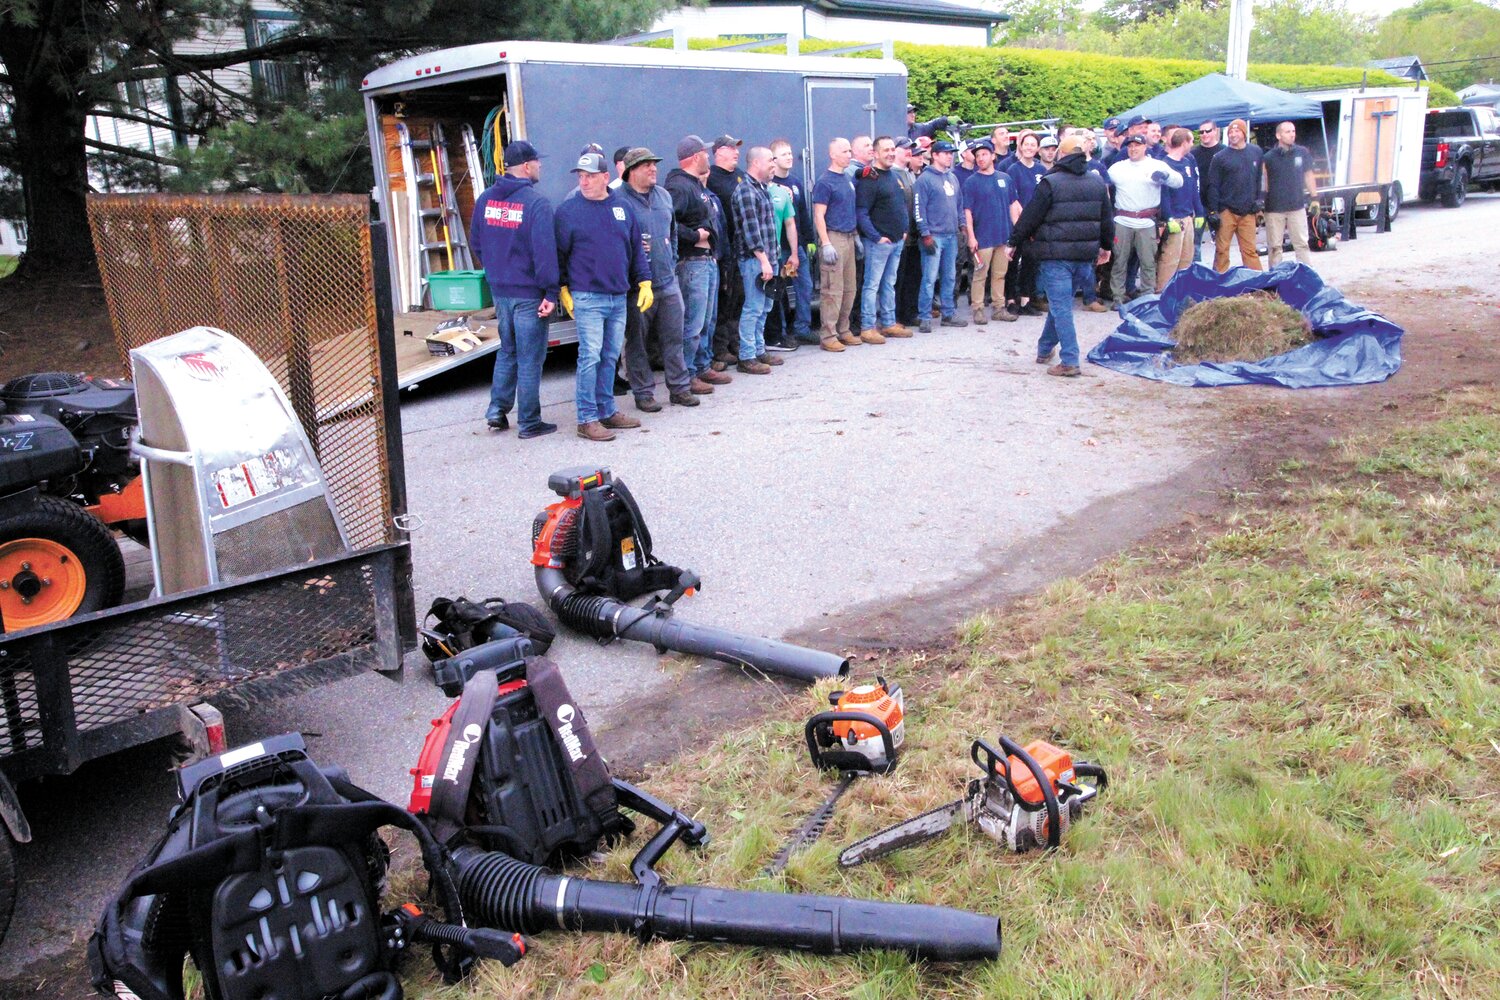 CLEANUP TEAM: Firefighters took a break to lineup for a group shot.